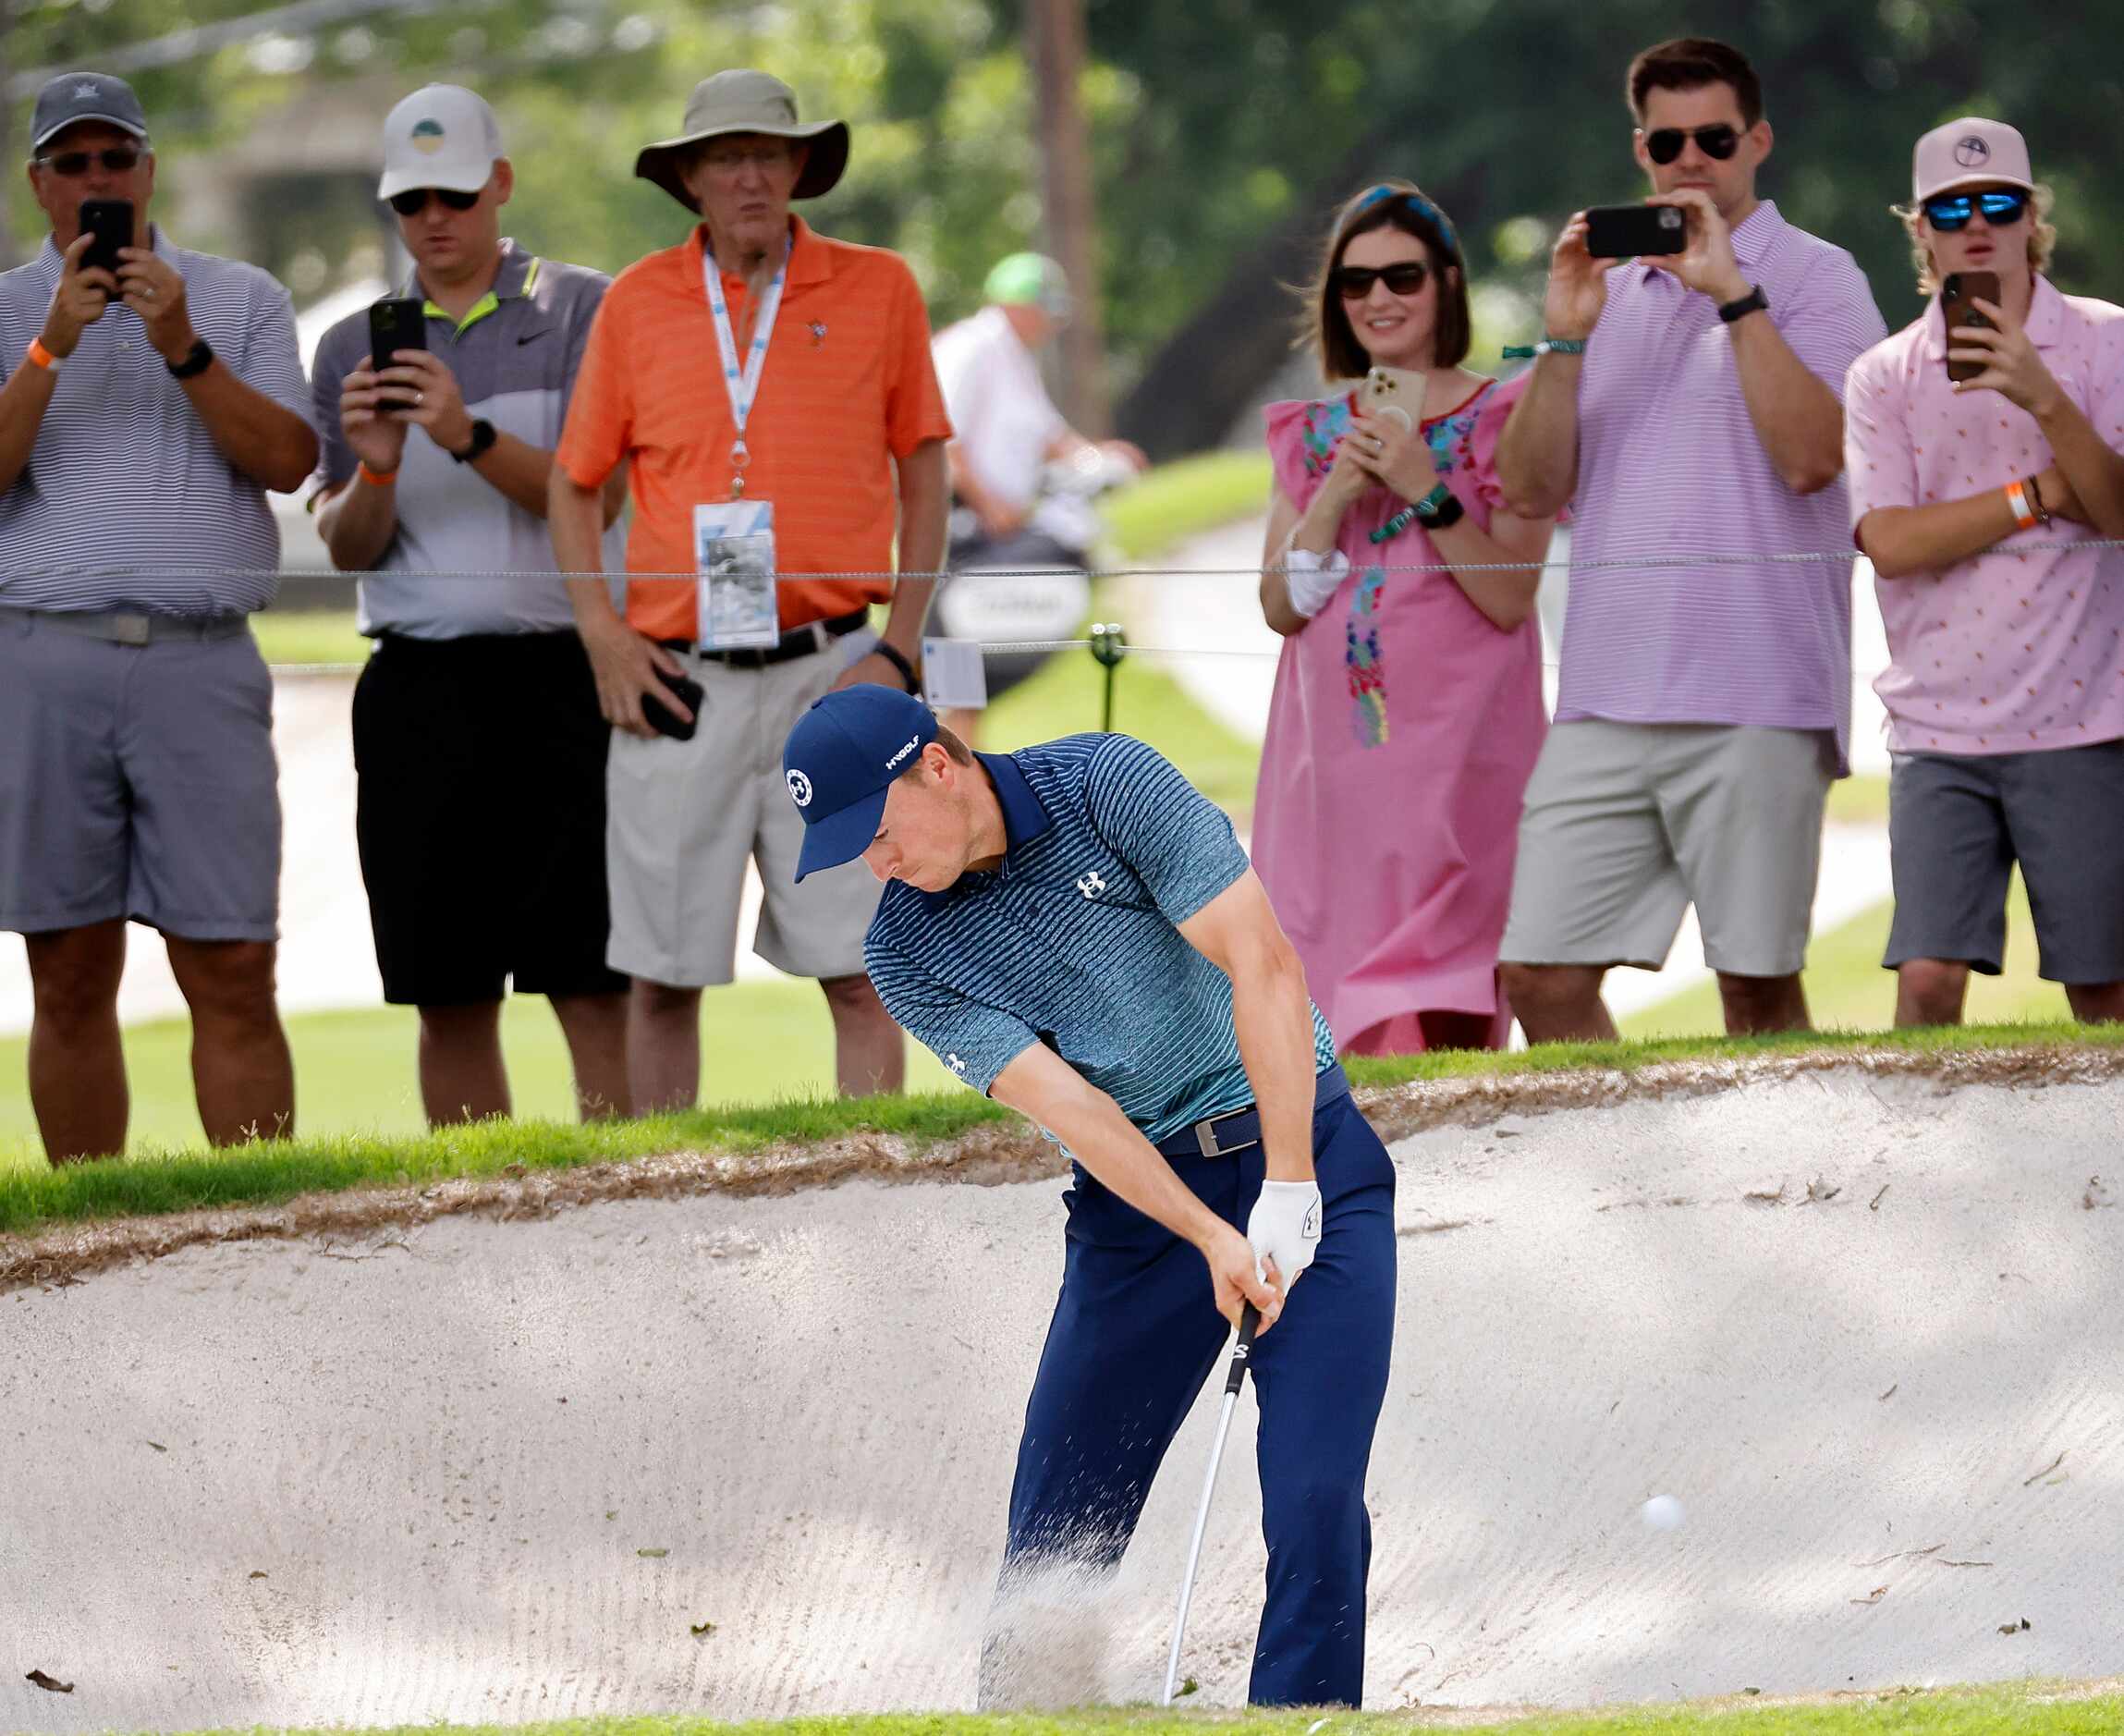 Professional golfer Jordan Spieth fires his shot out of the fairway bunker on No. 17 during...